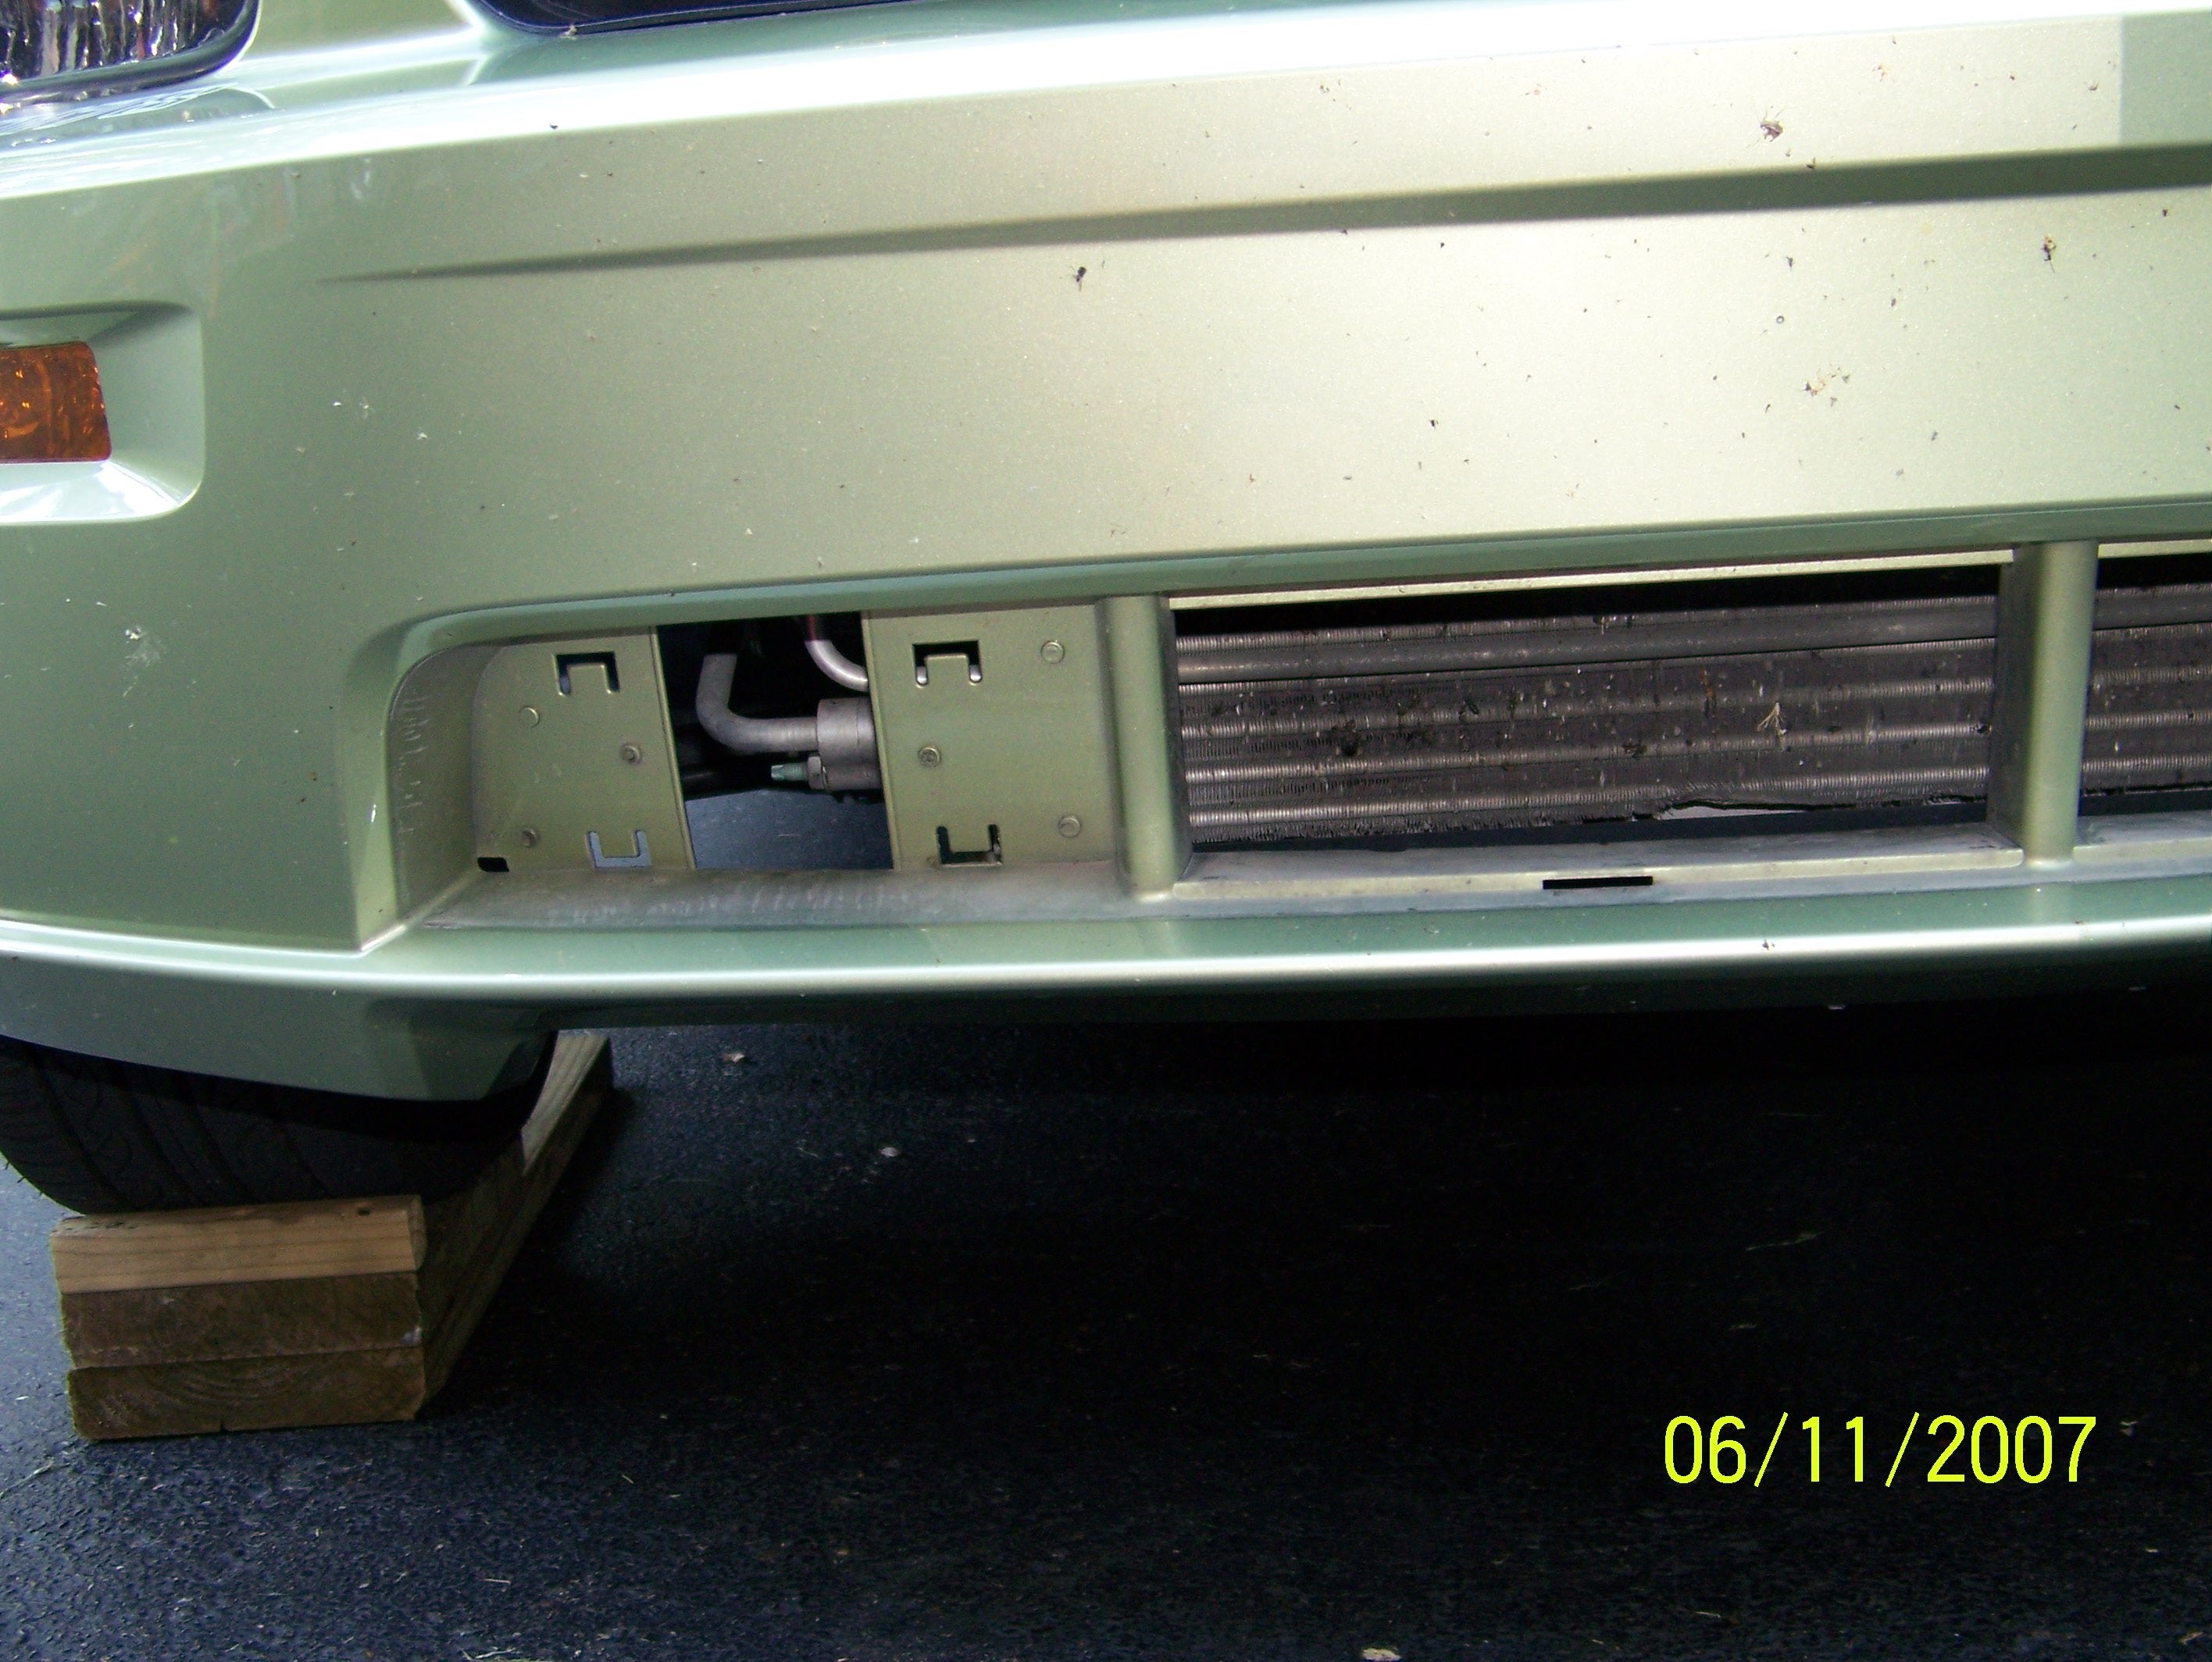 43055d1208554008-changing-modifying-lower-grill-gt-100_1557.jpg